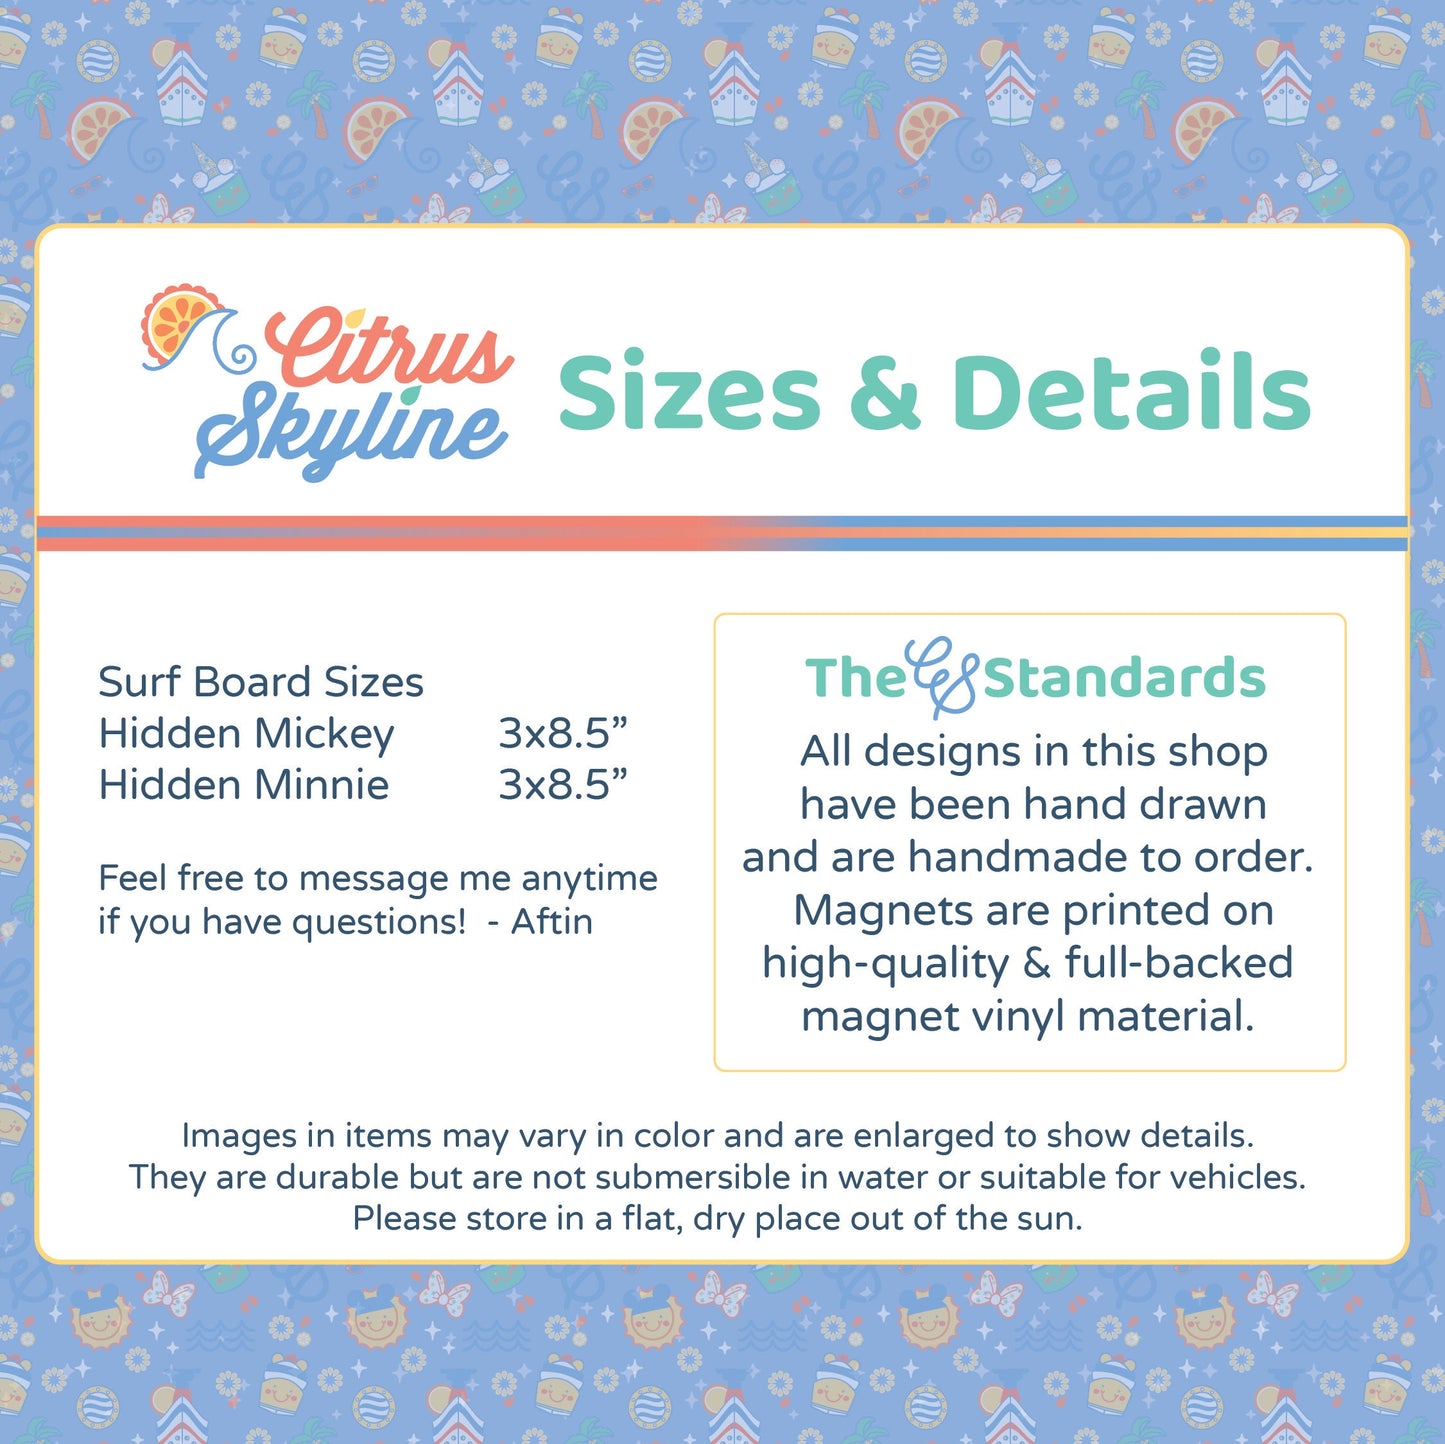 Personalizable Beach Surf Boards DCL Cruise Magnets with Hidden Mickey and Minnie Designs